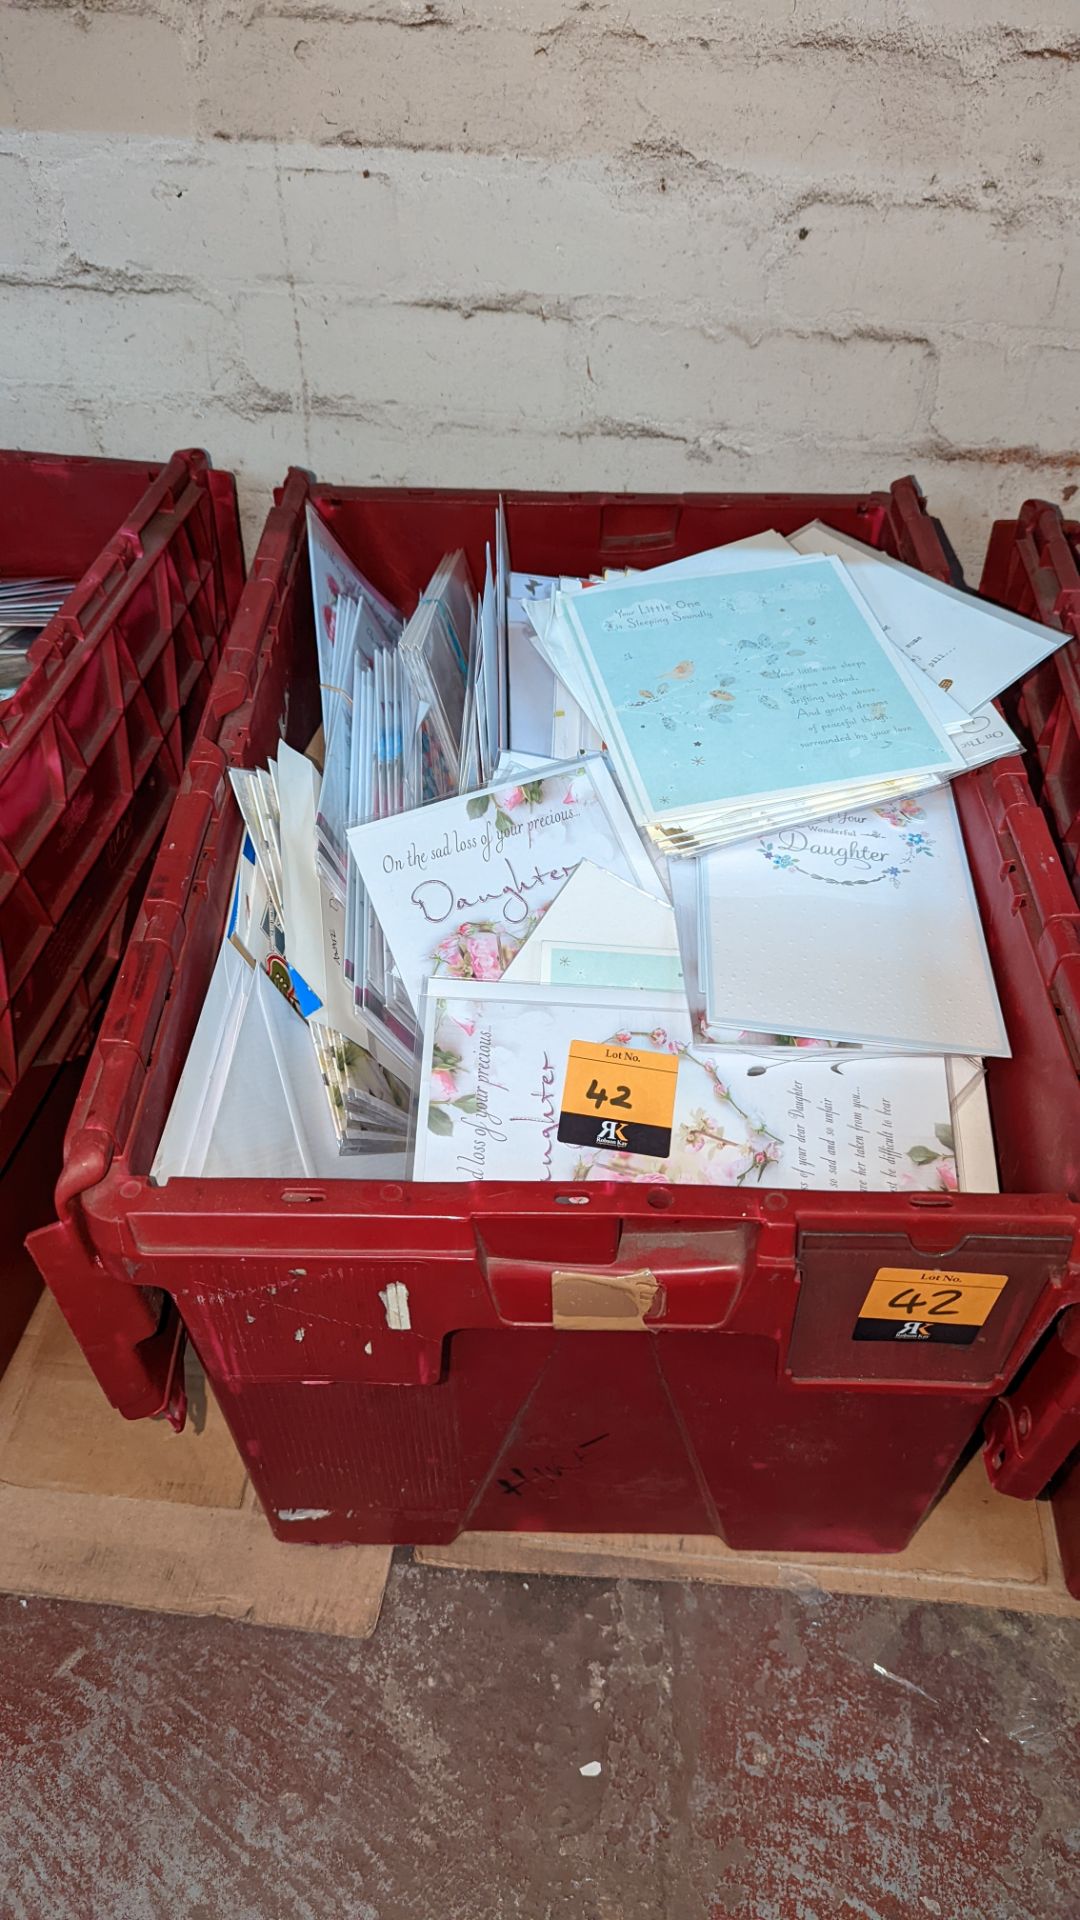 Contents of a crate of greetings cards - crate excluded